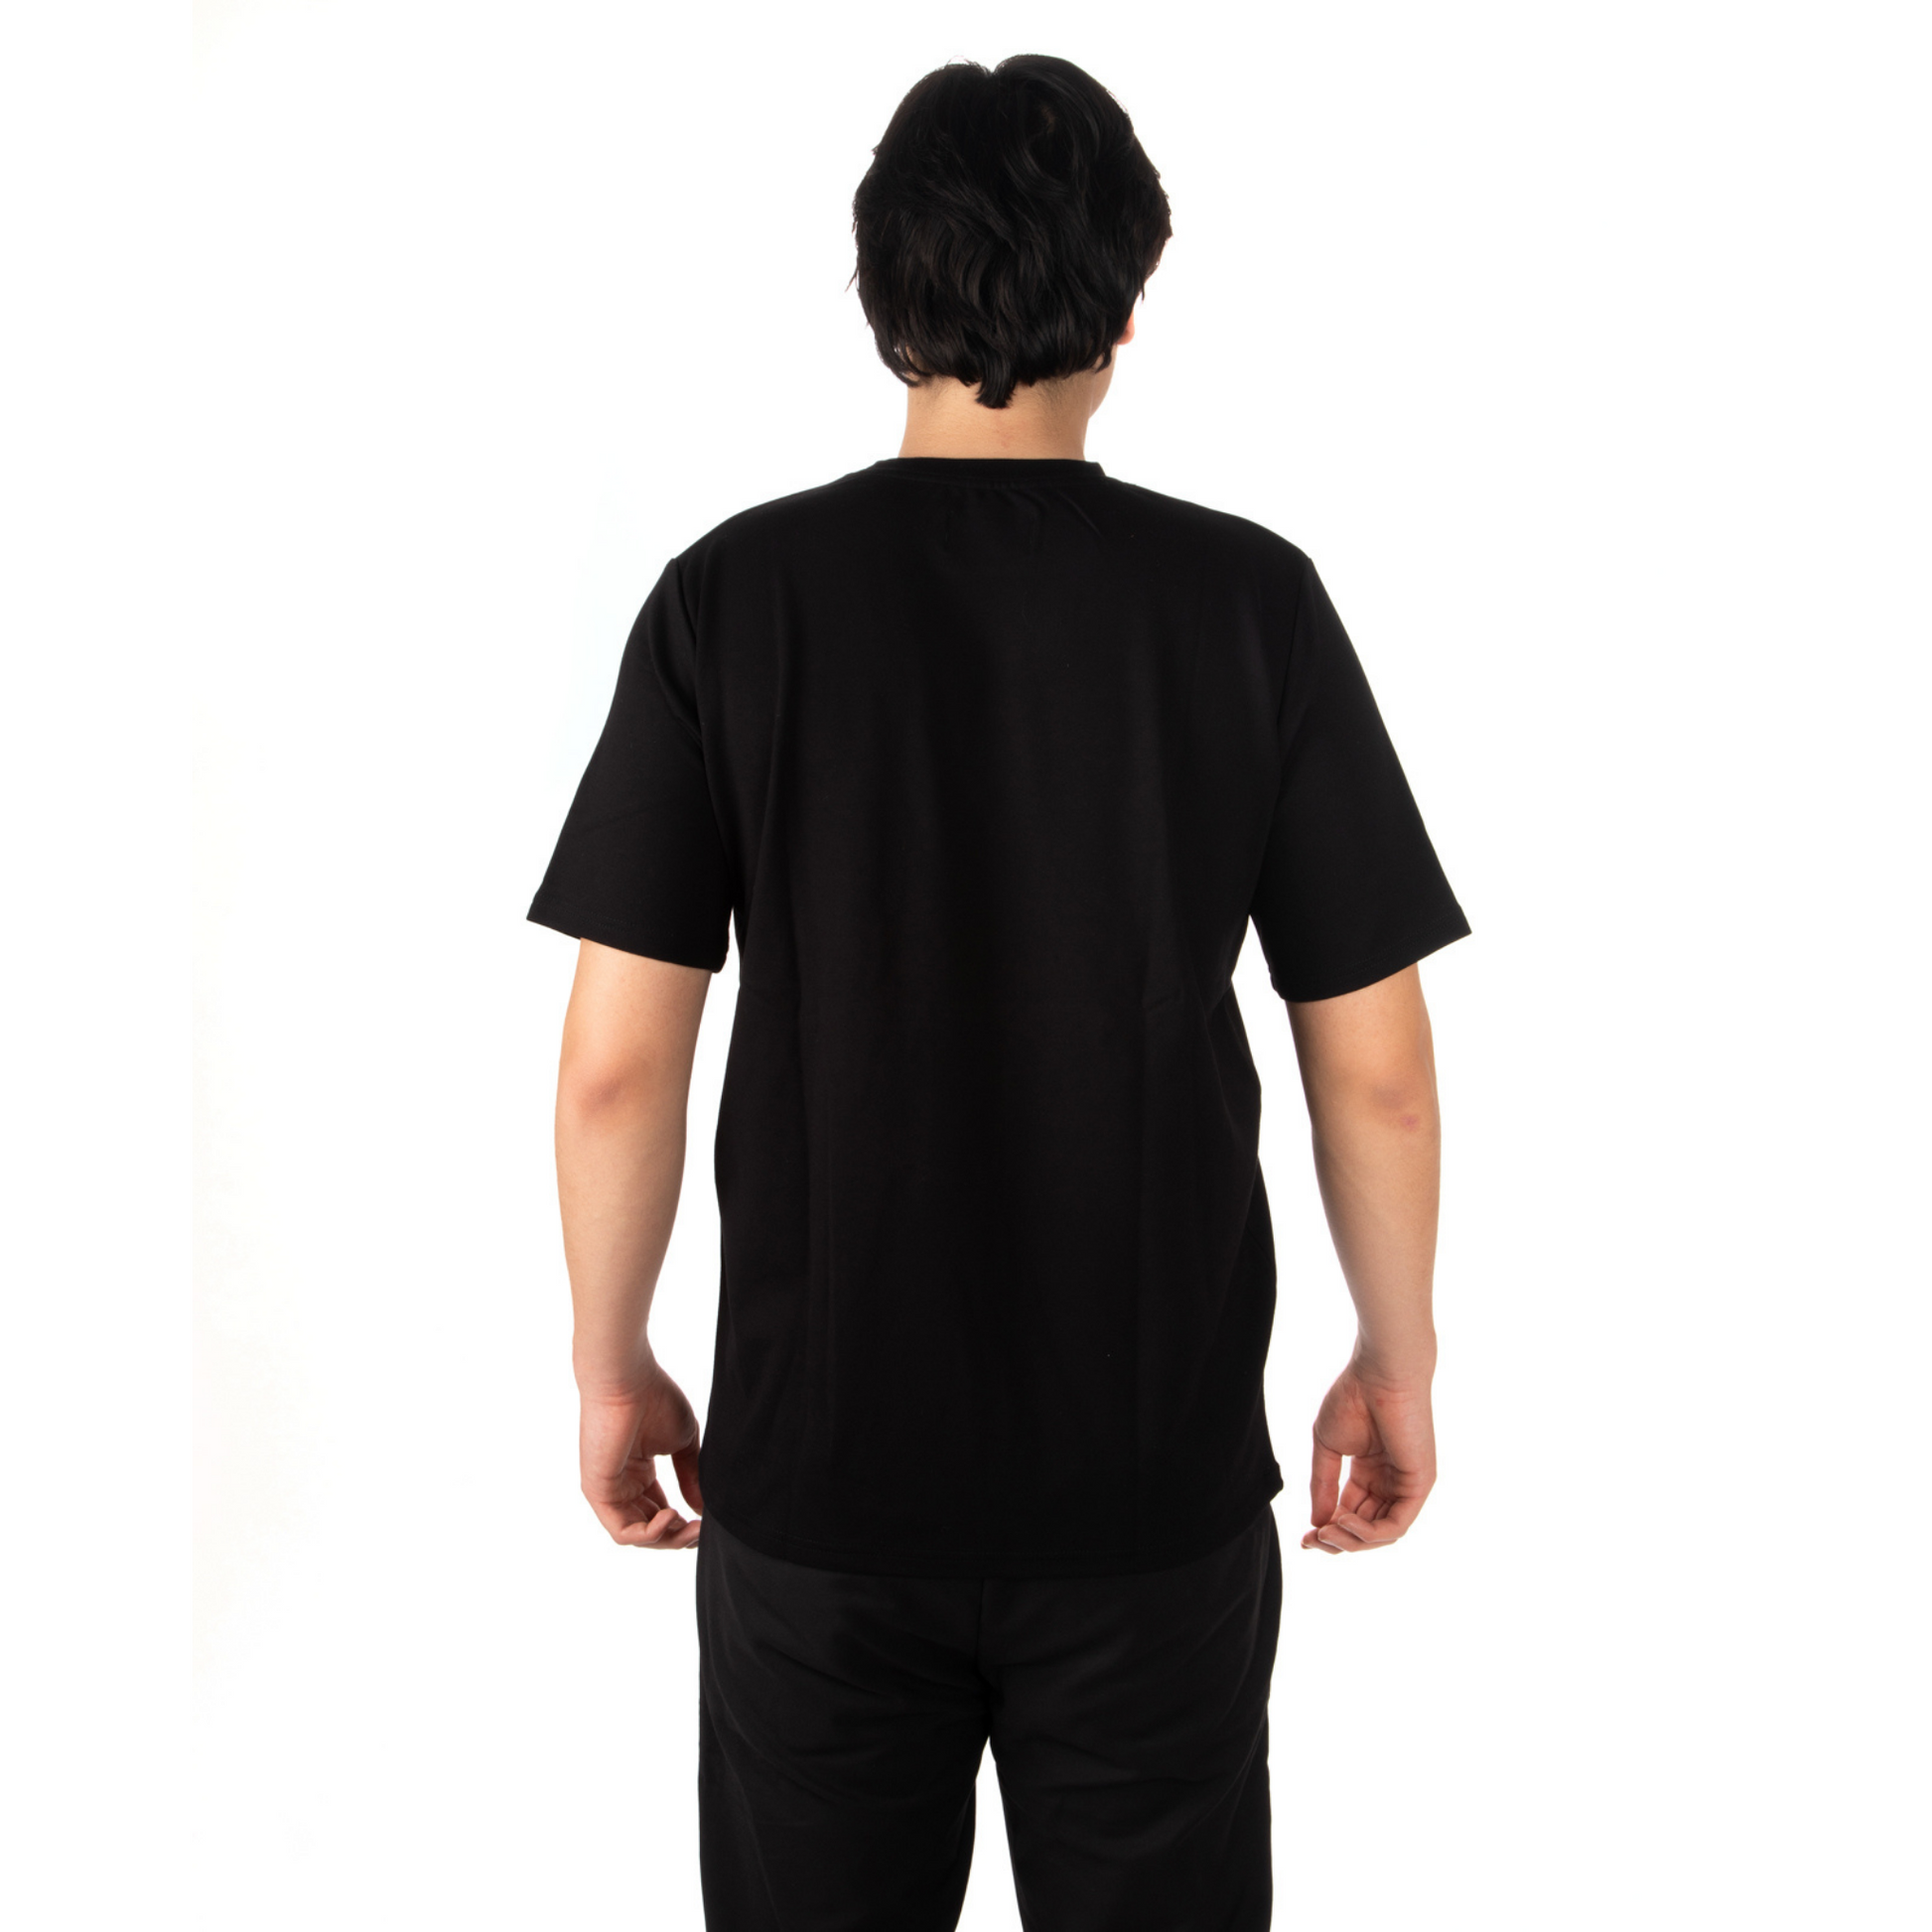 L’Homme Moderne Black T-shirt with Black Smiley back view on male model